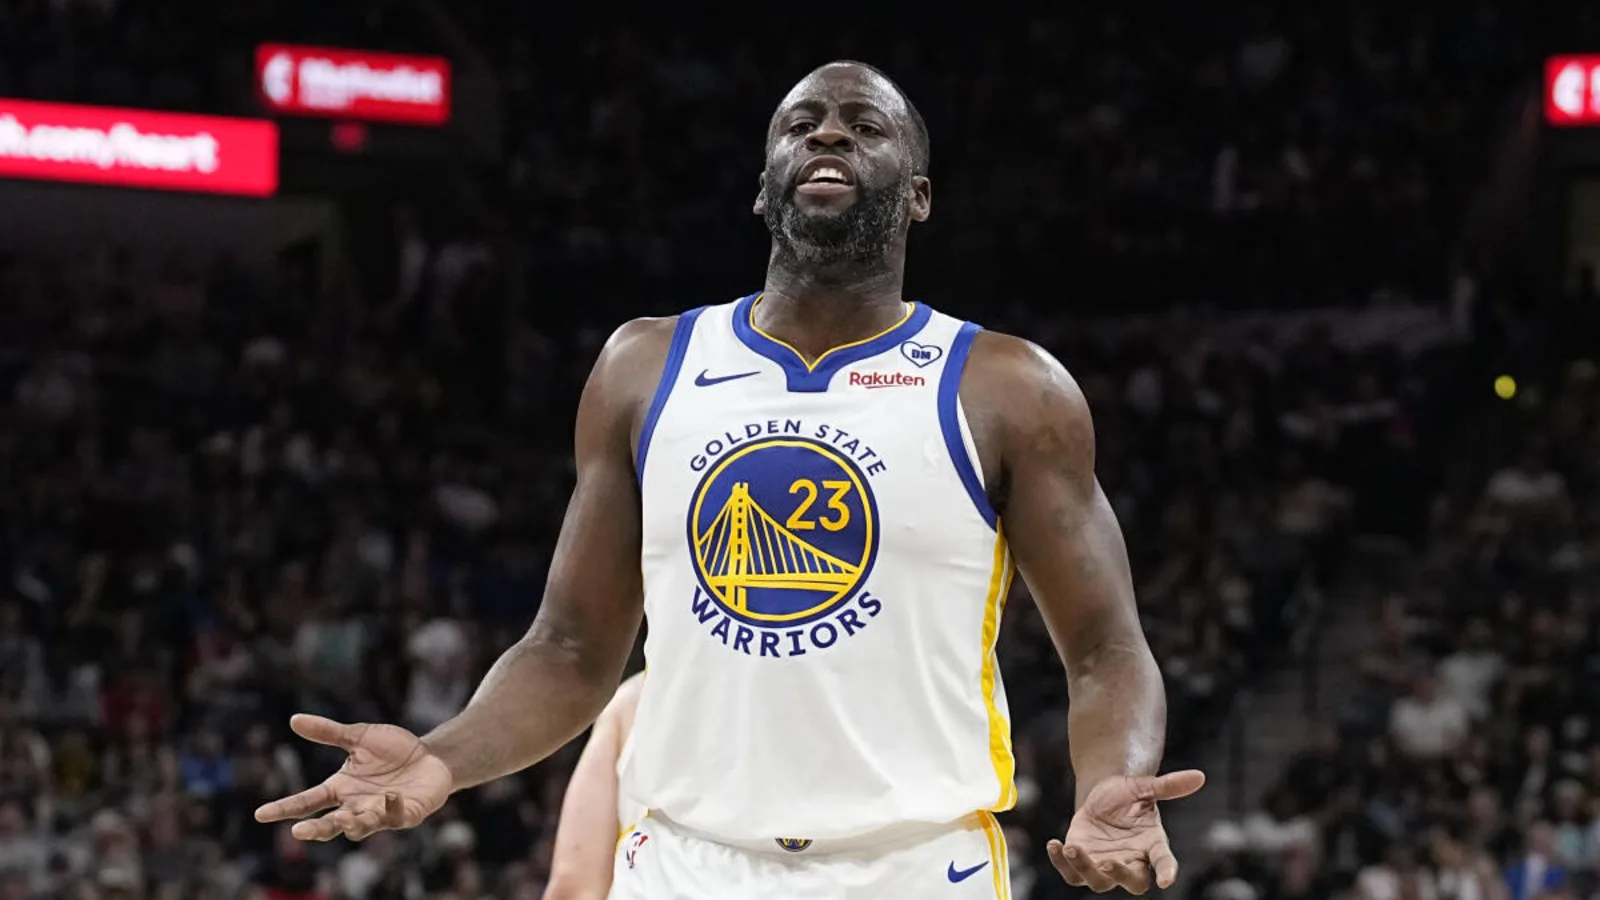 ESPN reporter says Draymond Green has “Destroyed” the Warriors dynasty